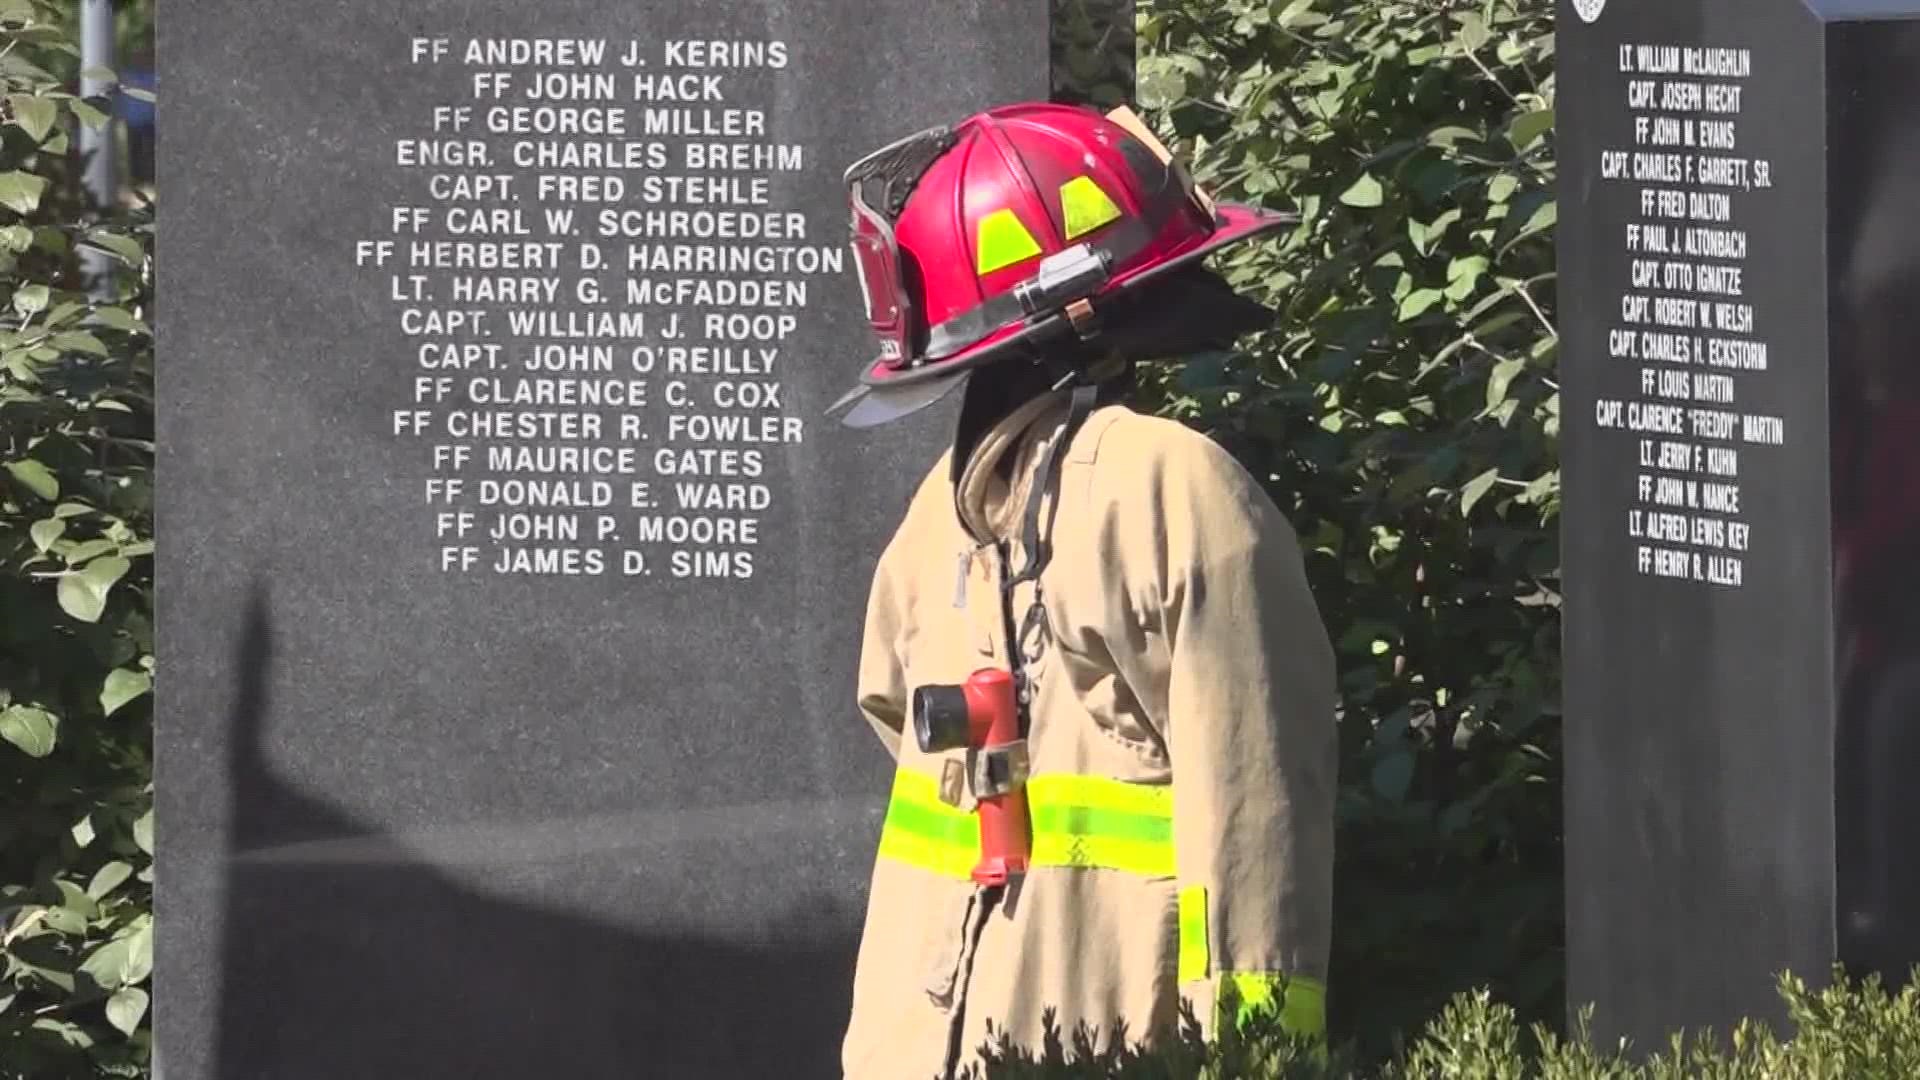 During an annual memorial service, the Columbus Division of Fire honored the 41 lives lost this year.